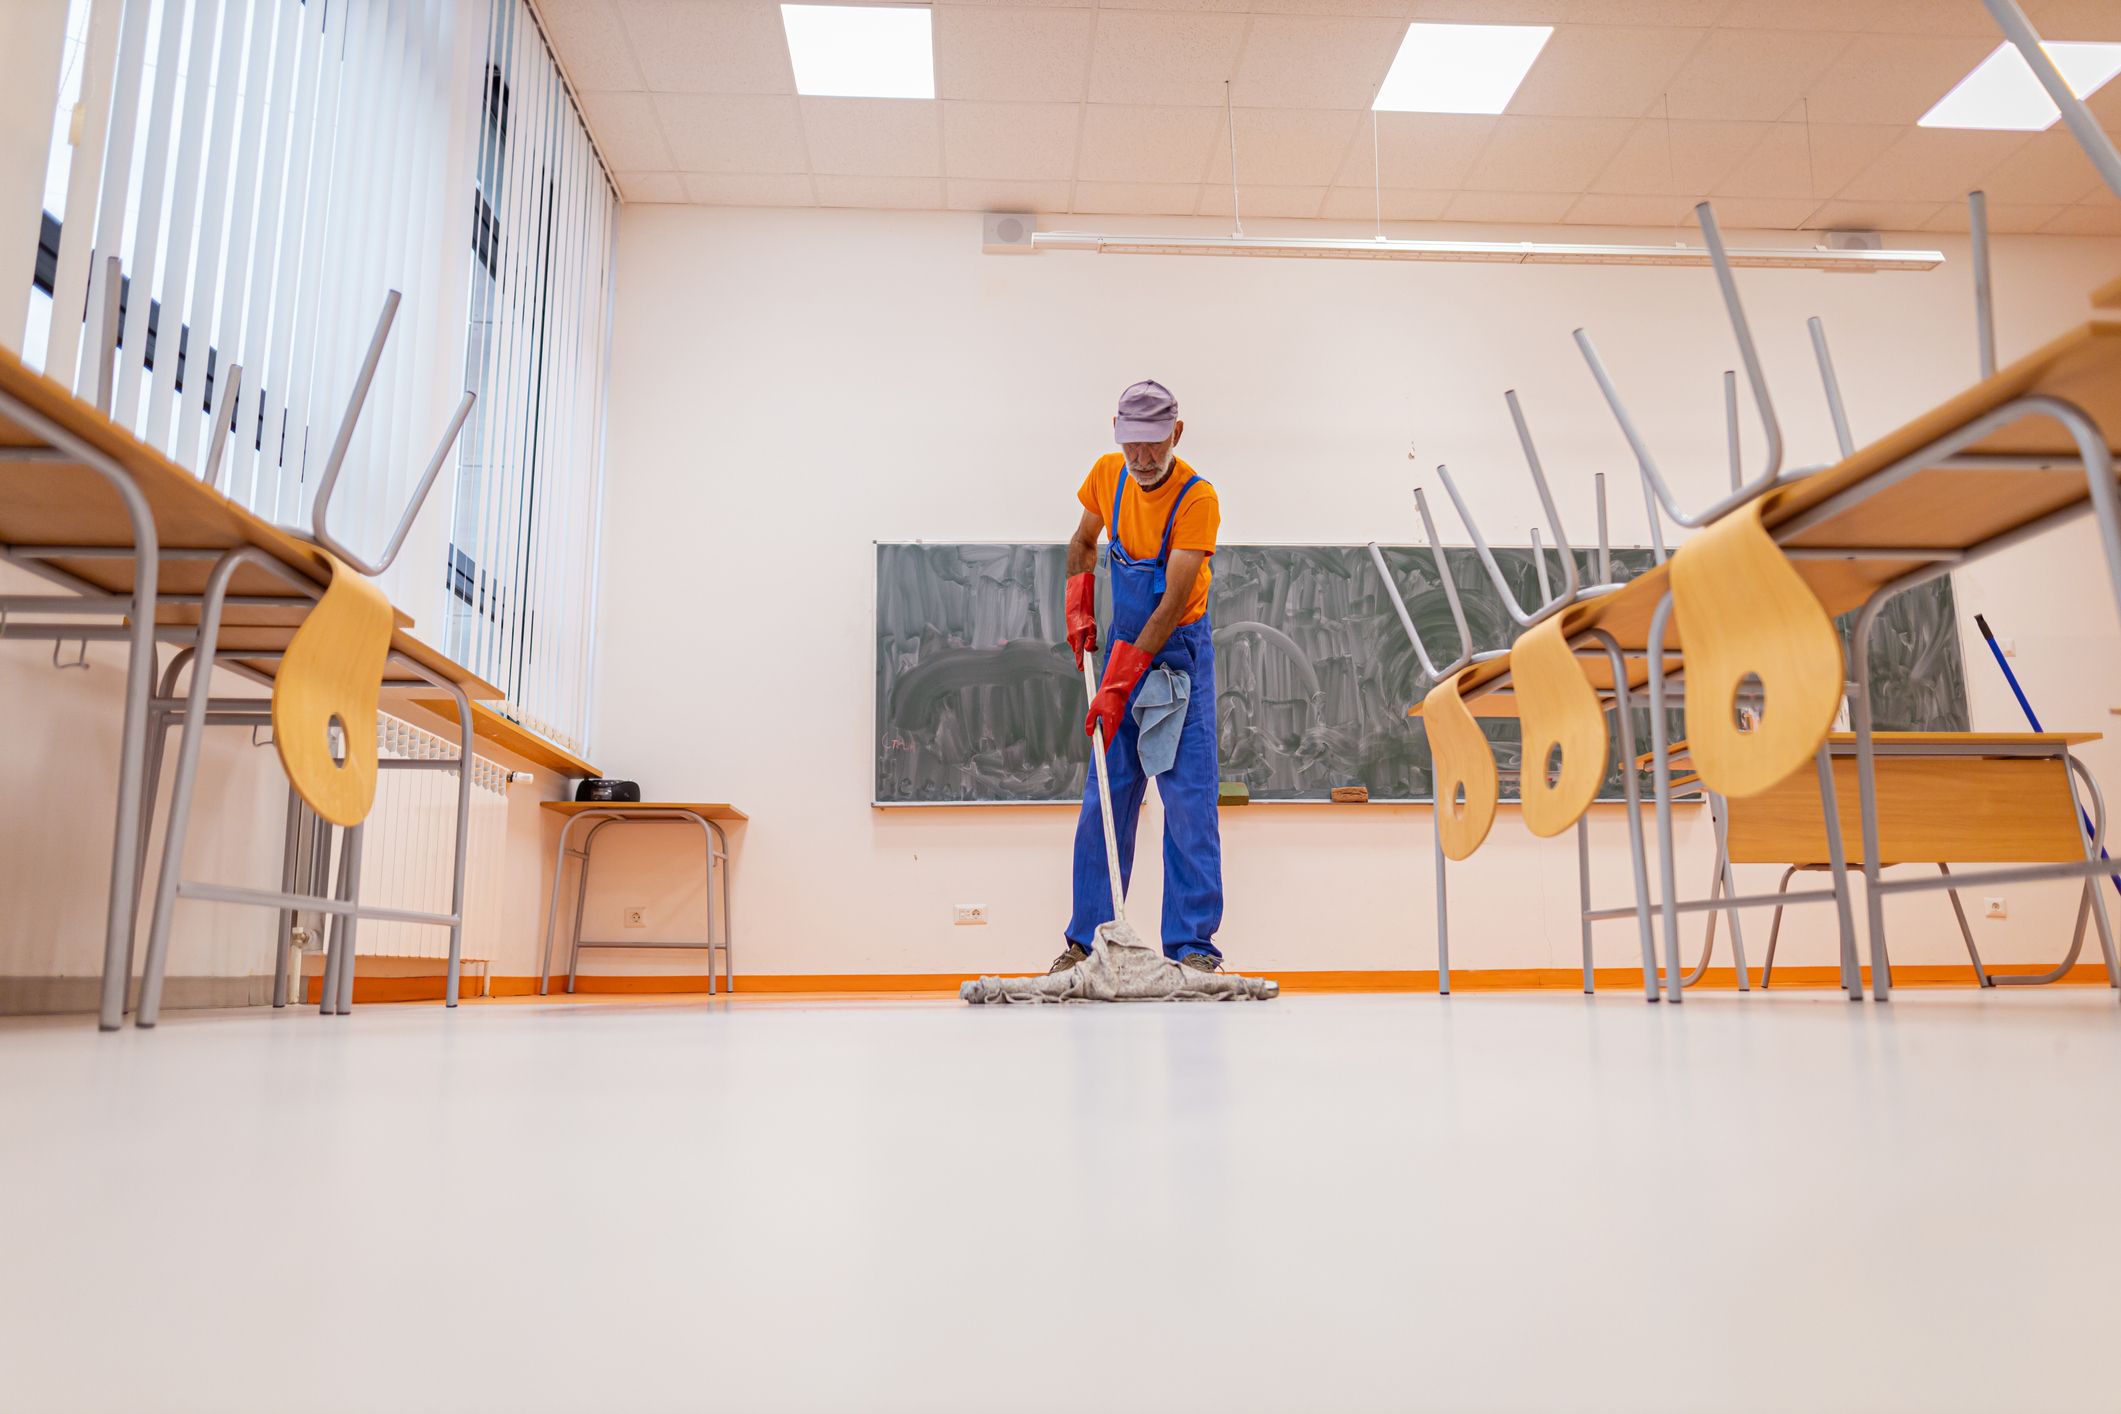 Commercial cleaner mopping the floors of a classroom setting